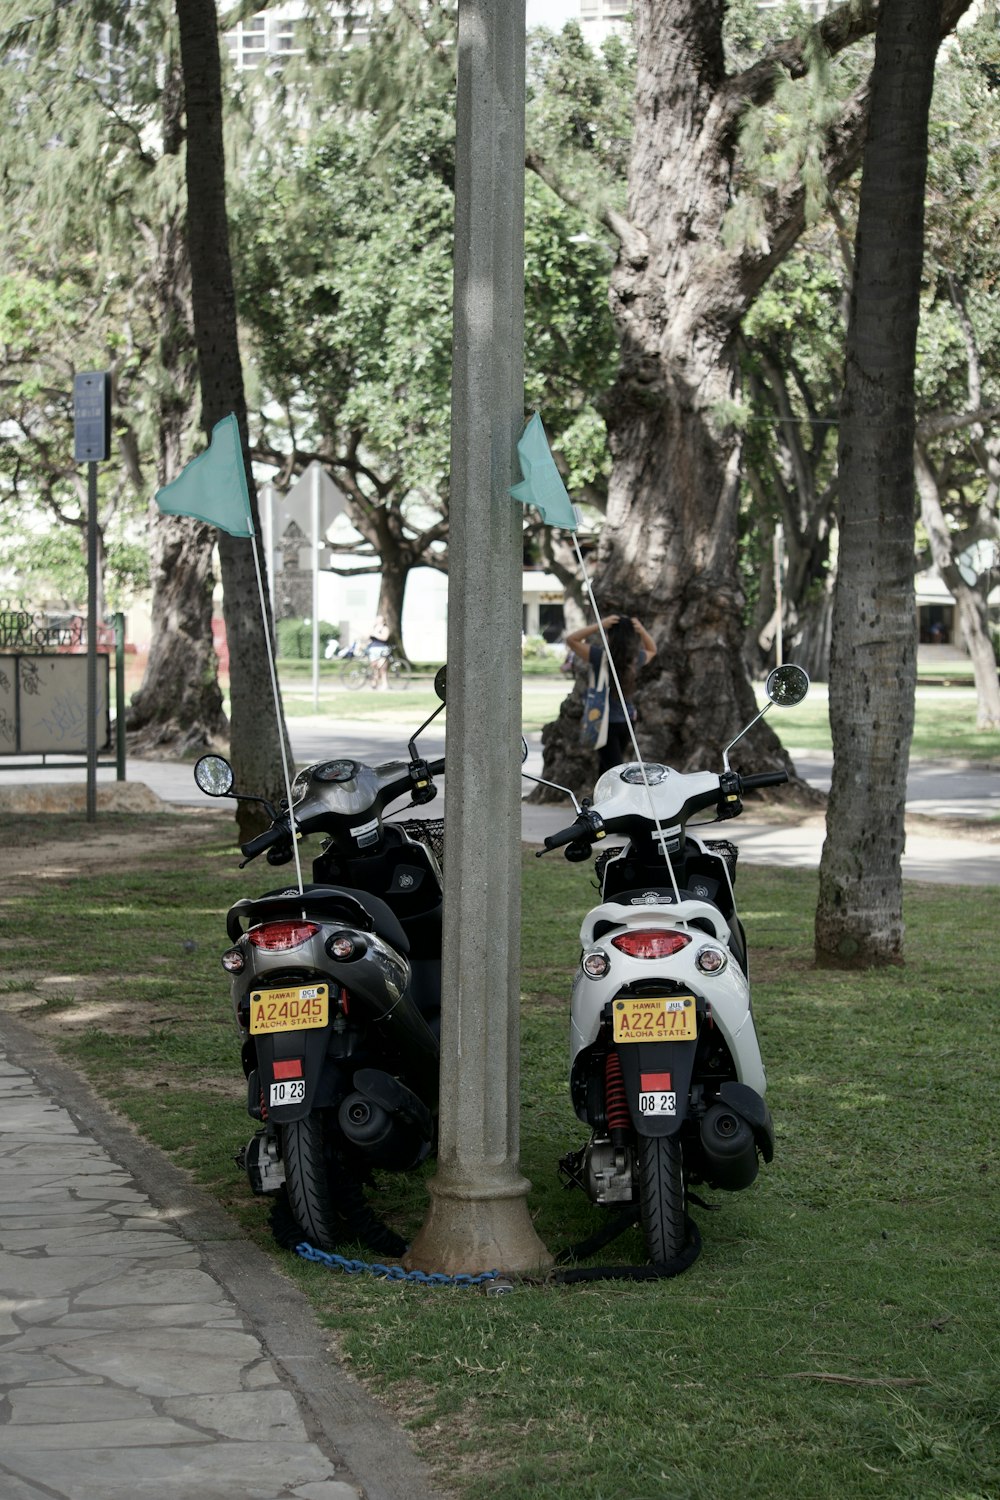 a couple of motorcycles parked next to a pole